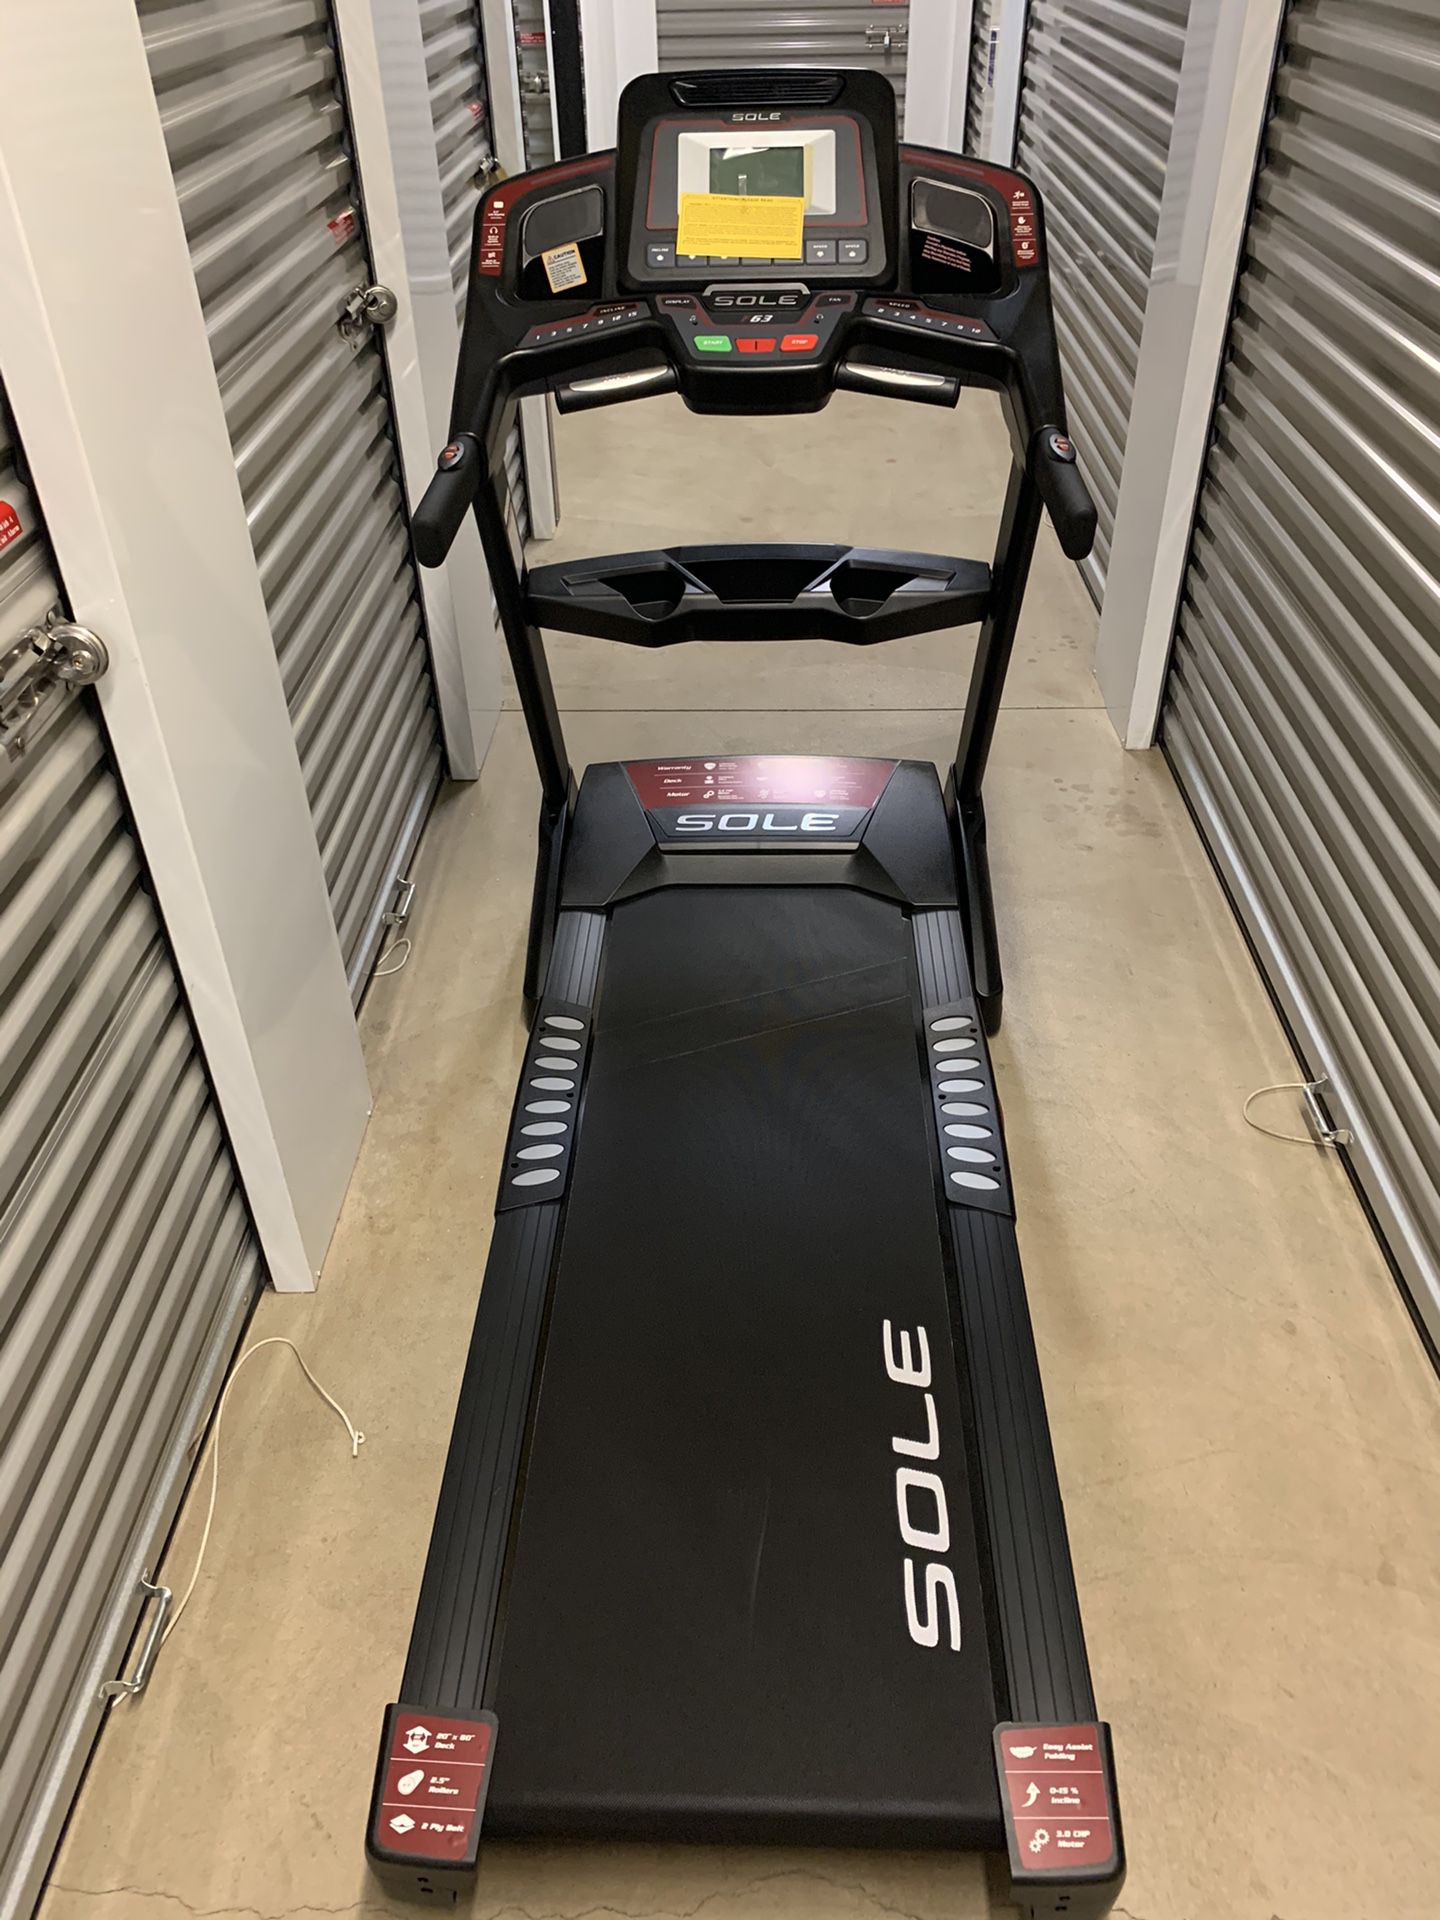 Sole Treadmill / Used Once / Only 9 months old / NEED GONE ASAP